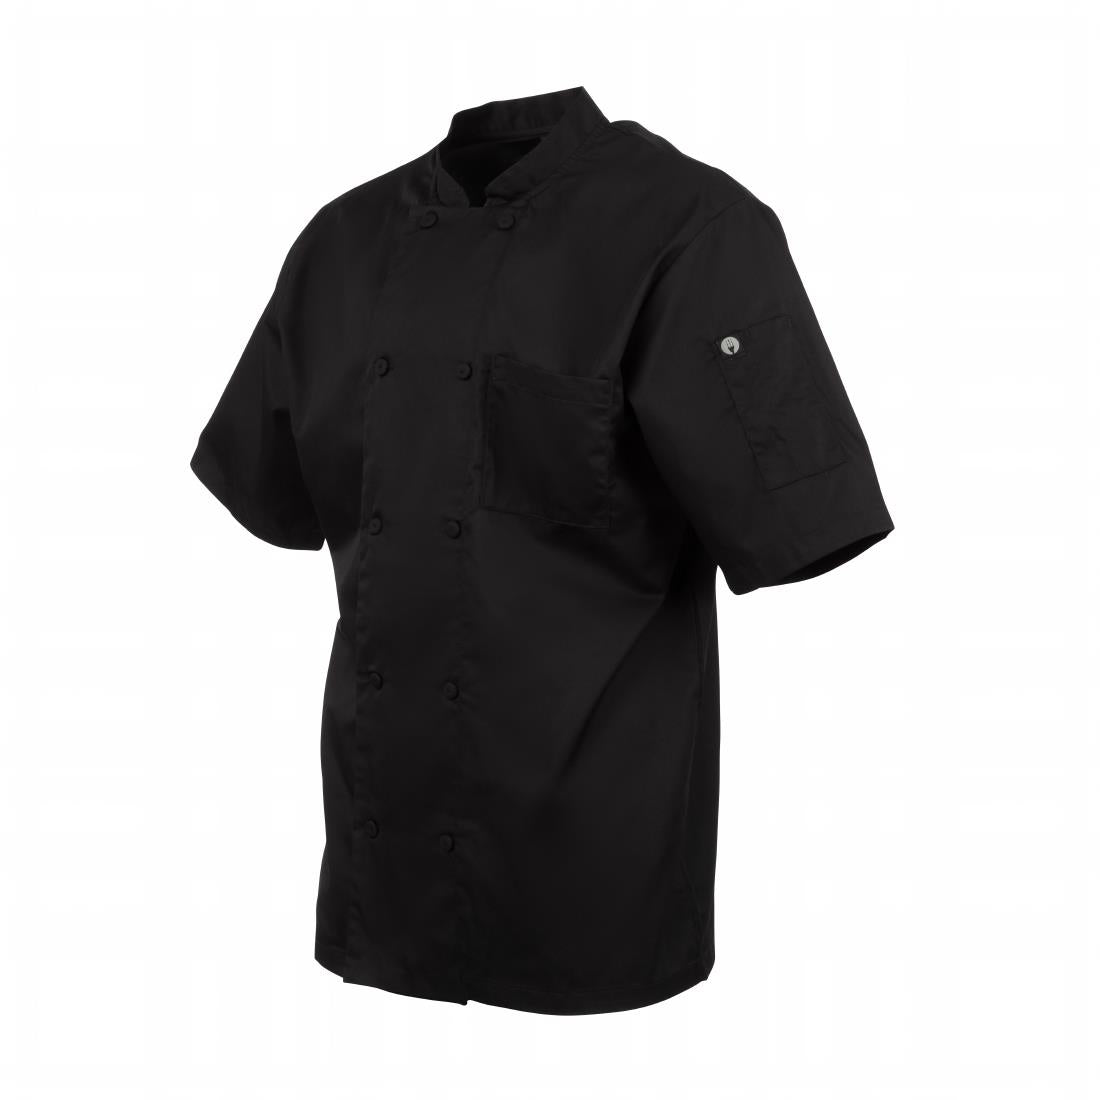 B054-S Chefs Works Montreal Cool Vent Unisex Short Sleeve Chefs Jacket Black S